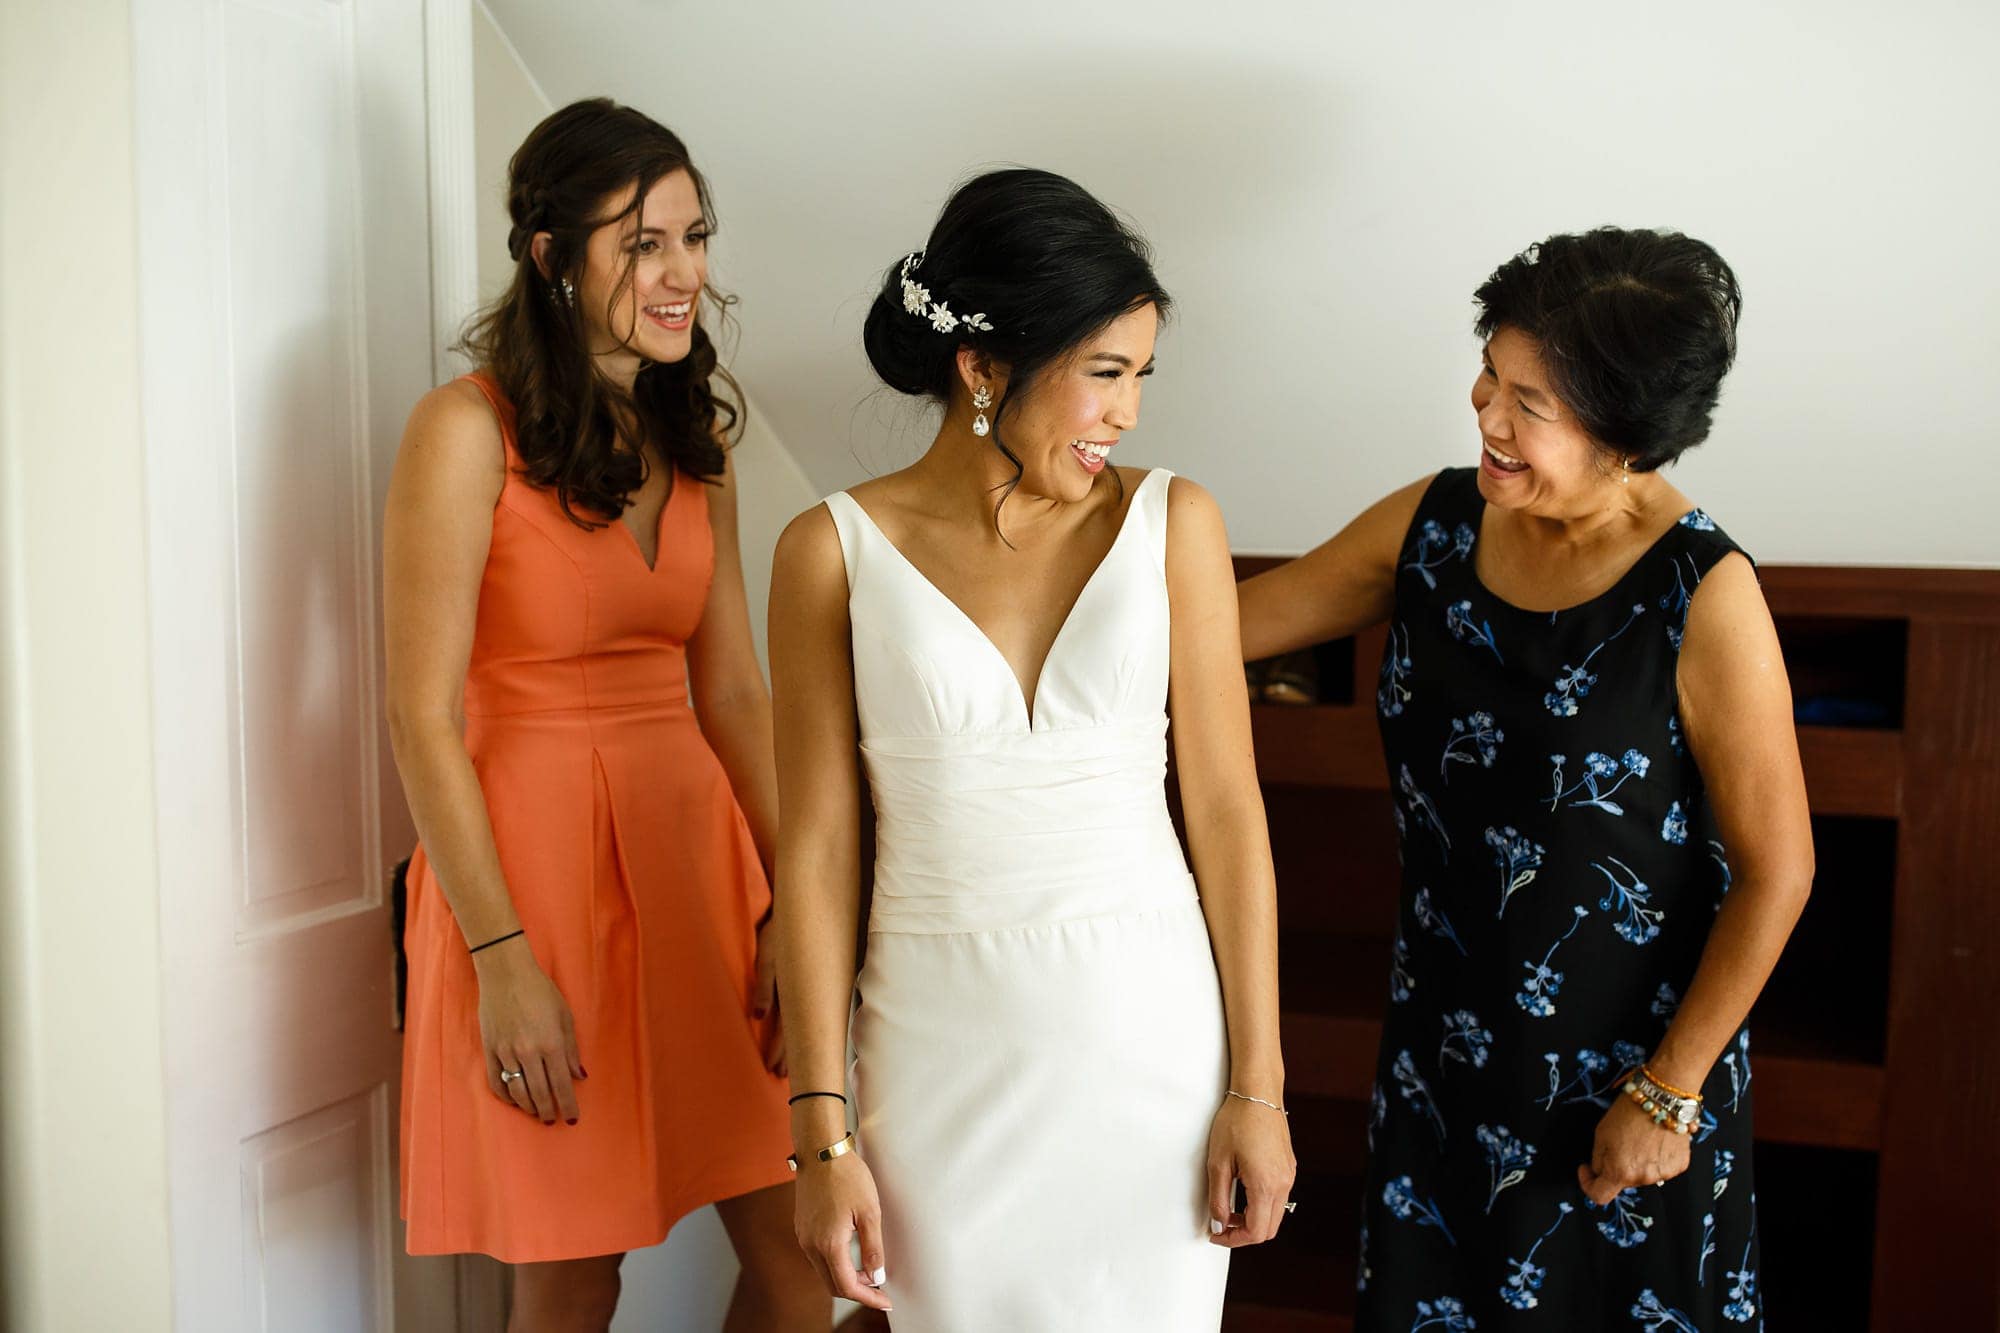 Megan shares a laugh with her mother while getting dressed with her maid of honor before her wedding in Boulder at Rembrandt Yard